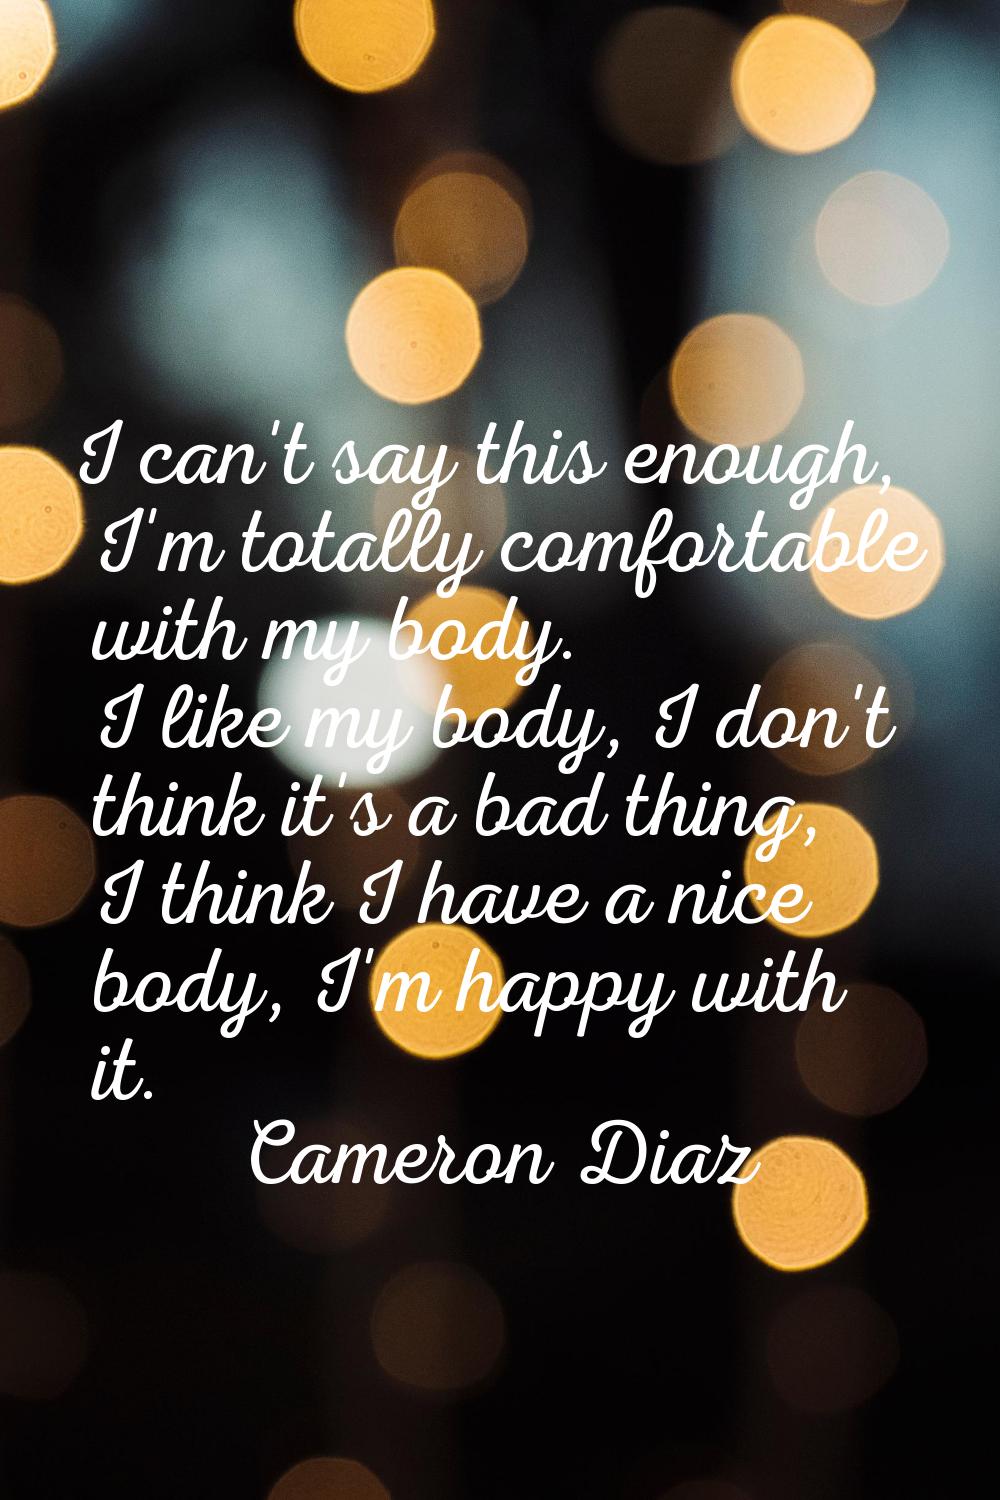 I can't say this enough, I'm totally comfortable with my body. I like my body, I don't think it's a